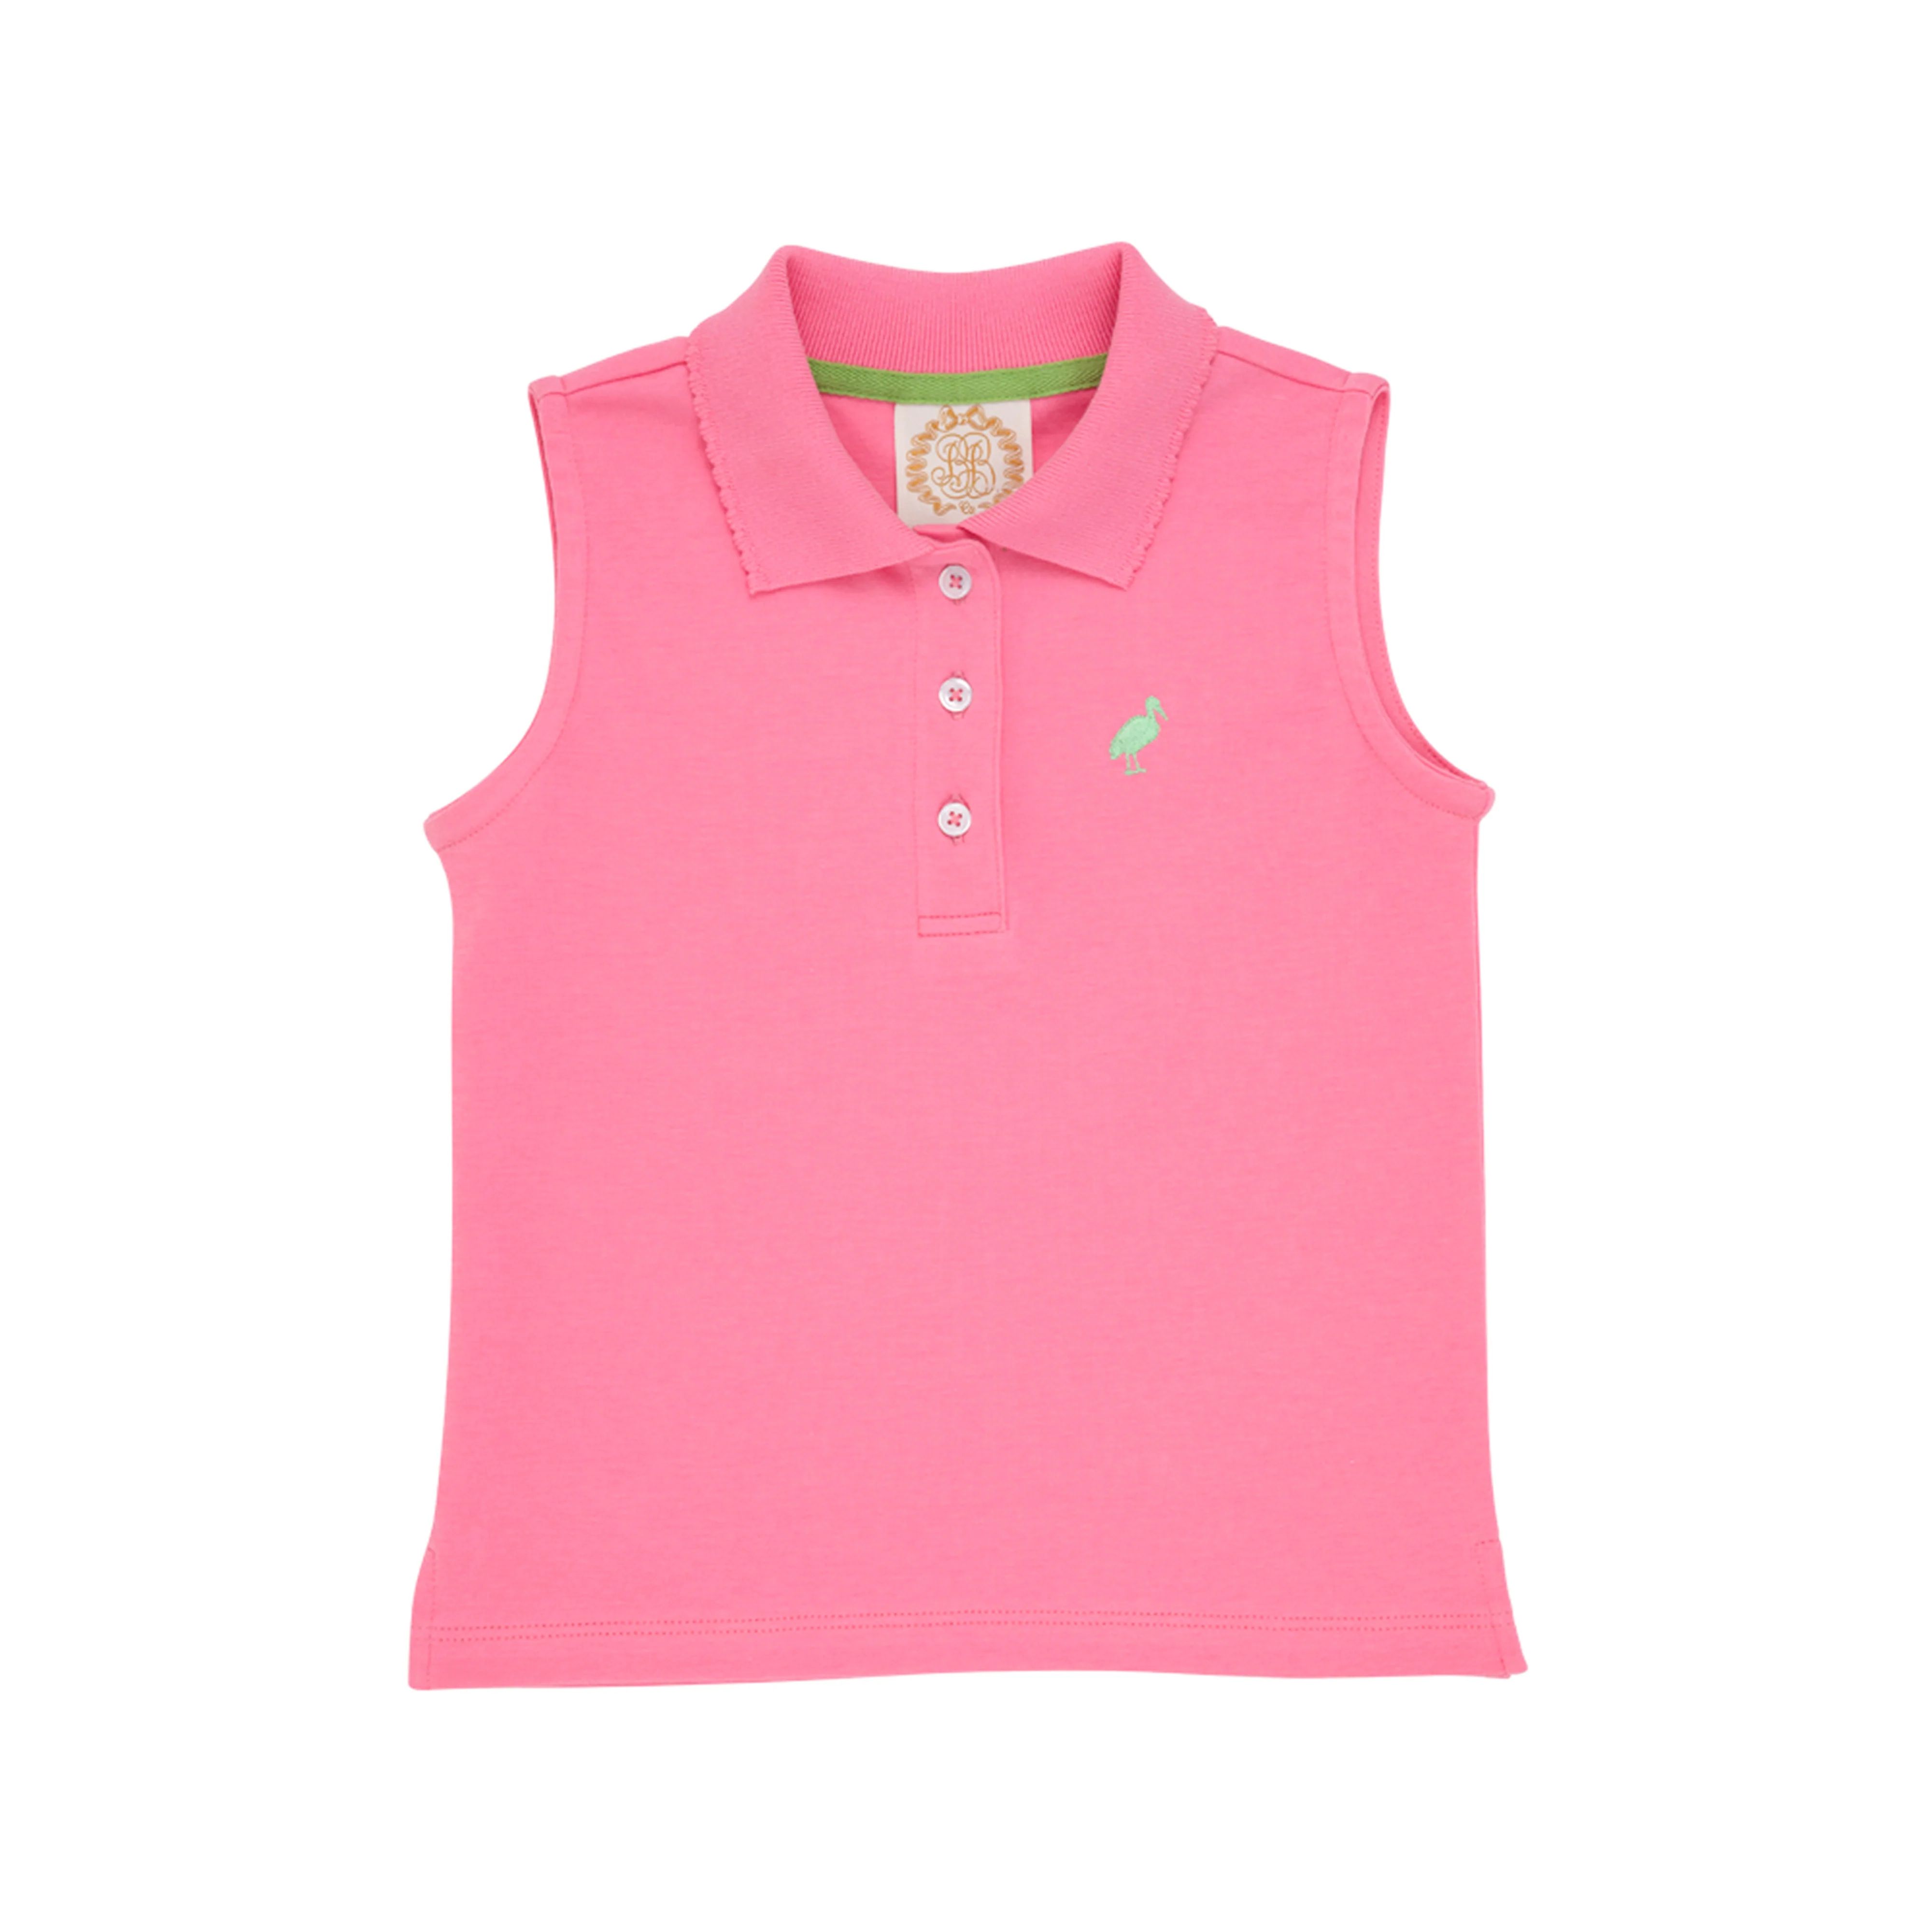 Sleeveless Anna Price Polo - Hamptons Hot Pink with Grace Bay Green Stork | The Beaufort Bonnet Company